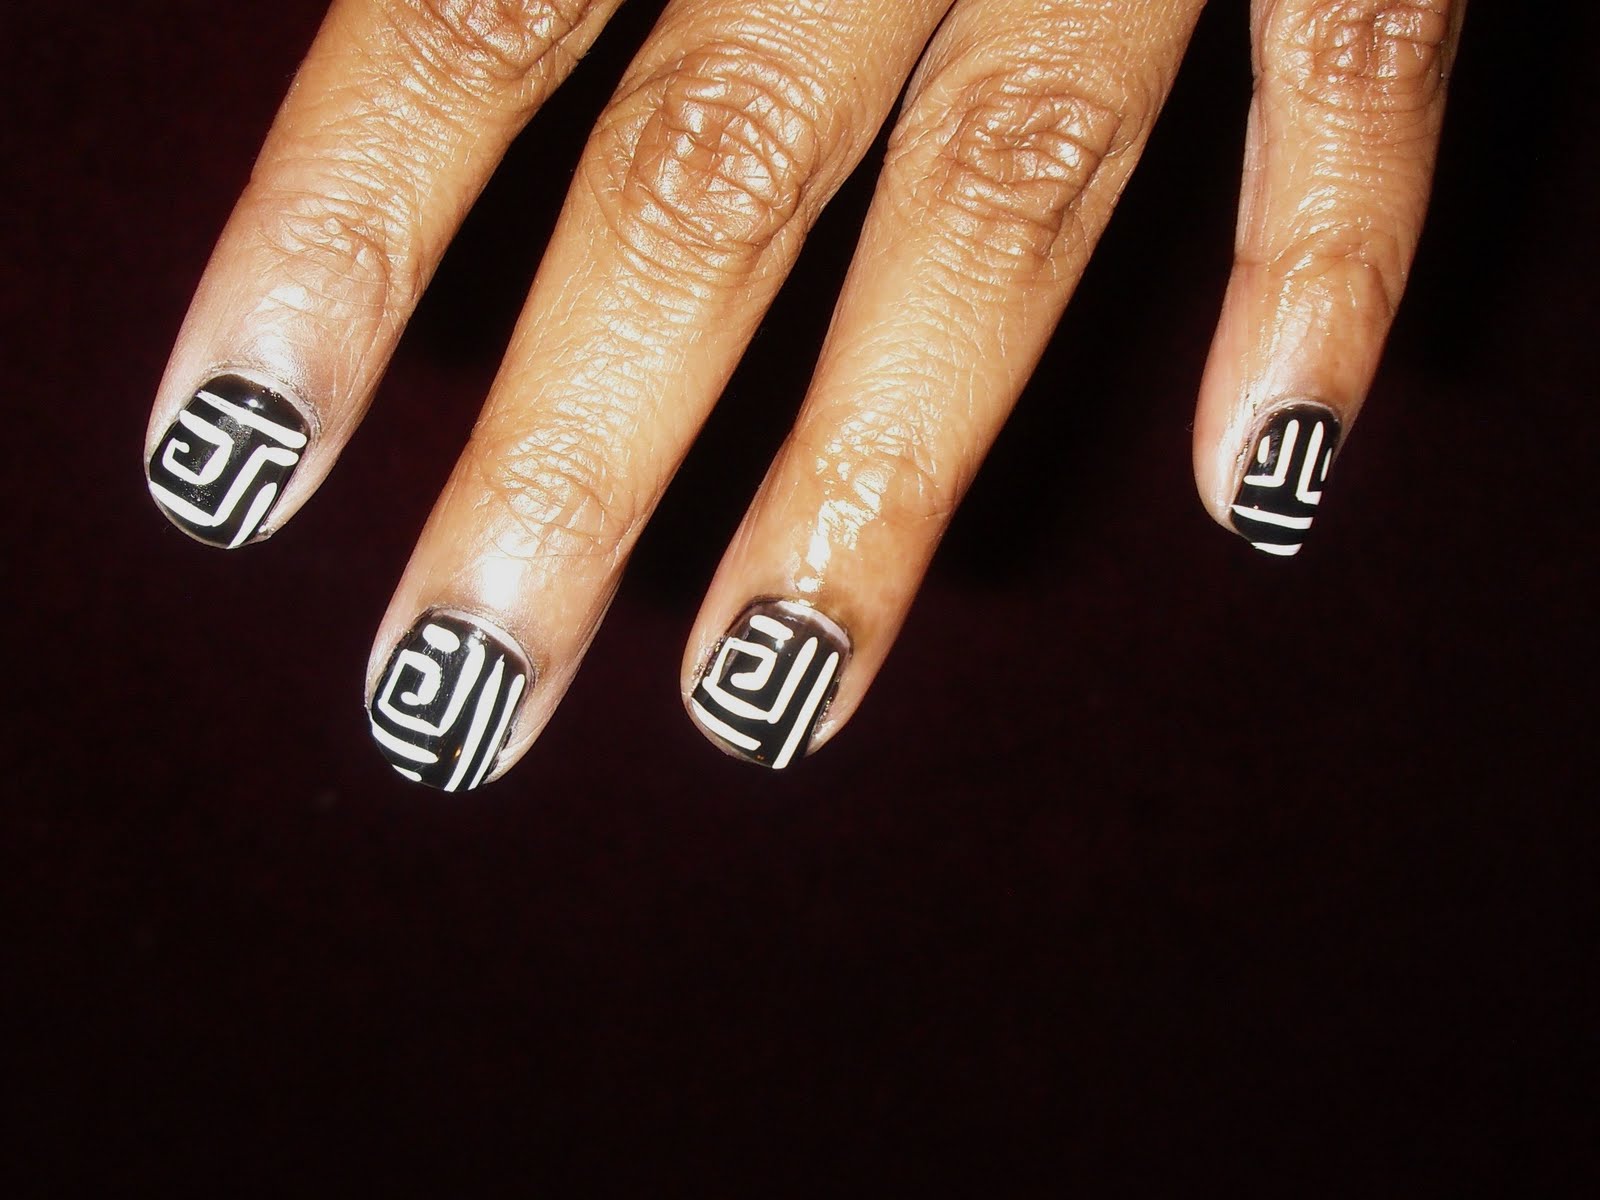 1. Aztec Nail Art Tutorial: 5 Easy Steps to Get the Look - wide 1